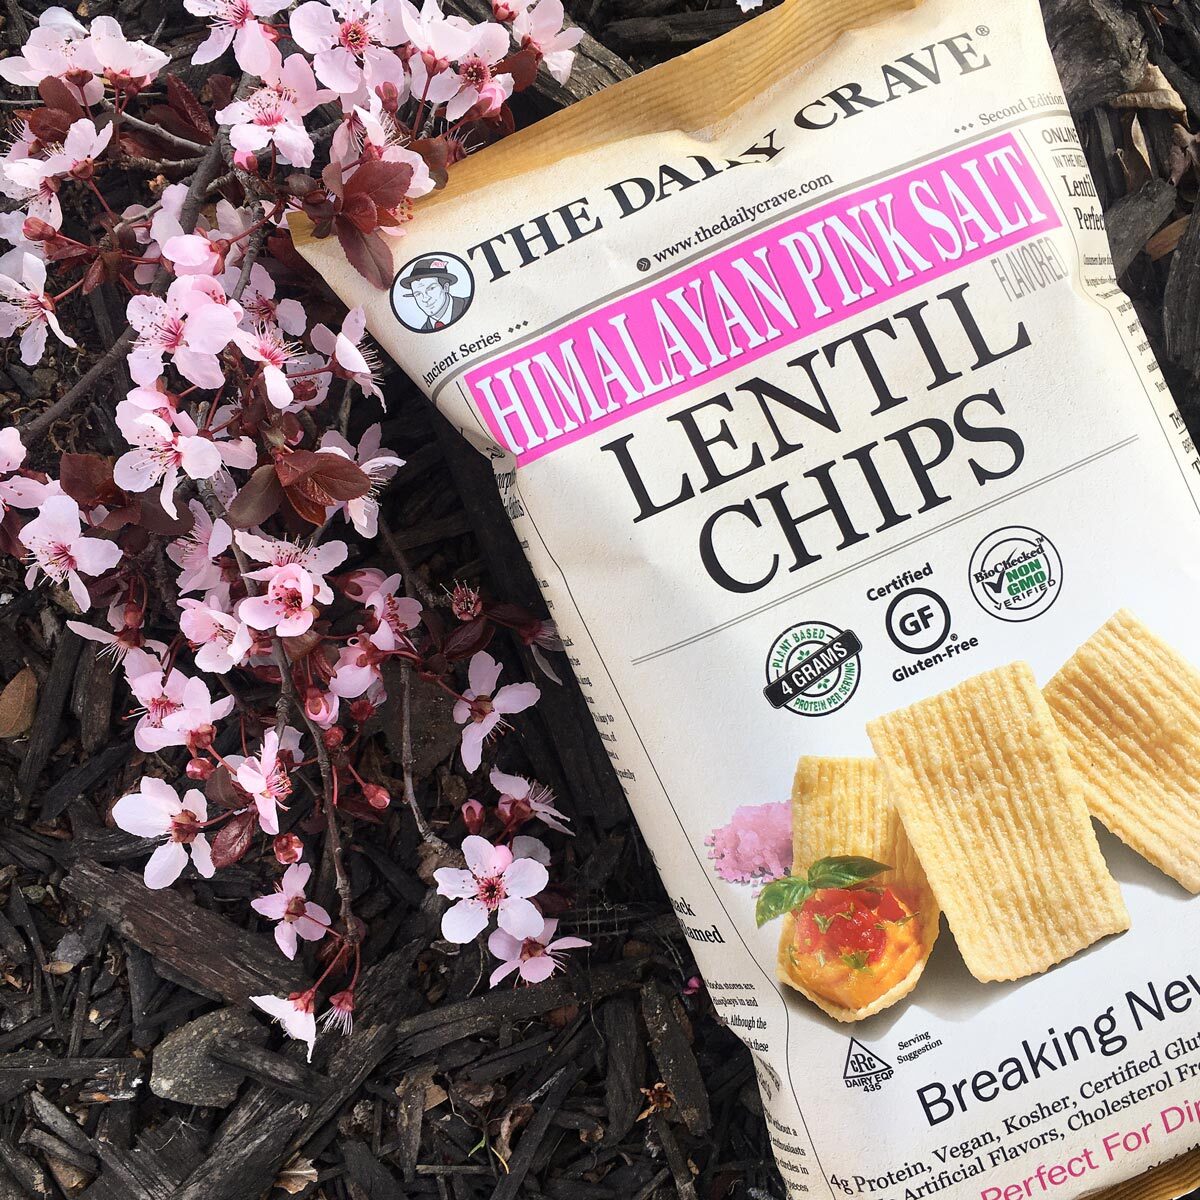 Lifestyle image of chips next to blossom